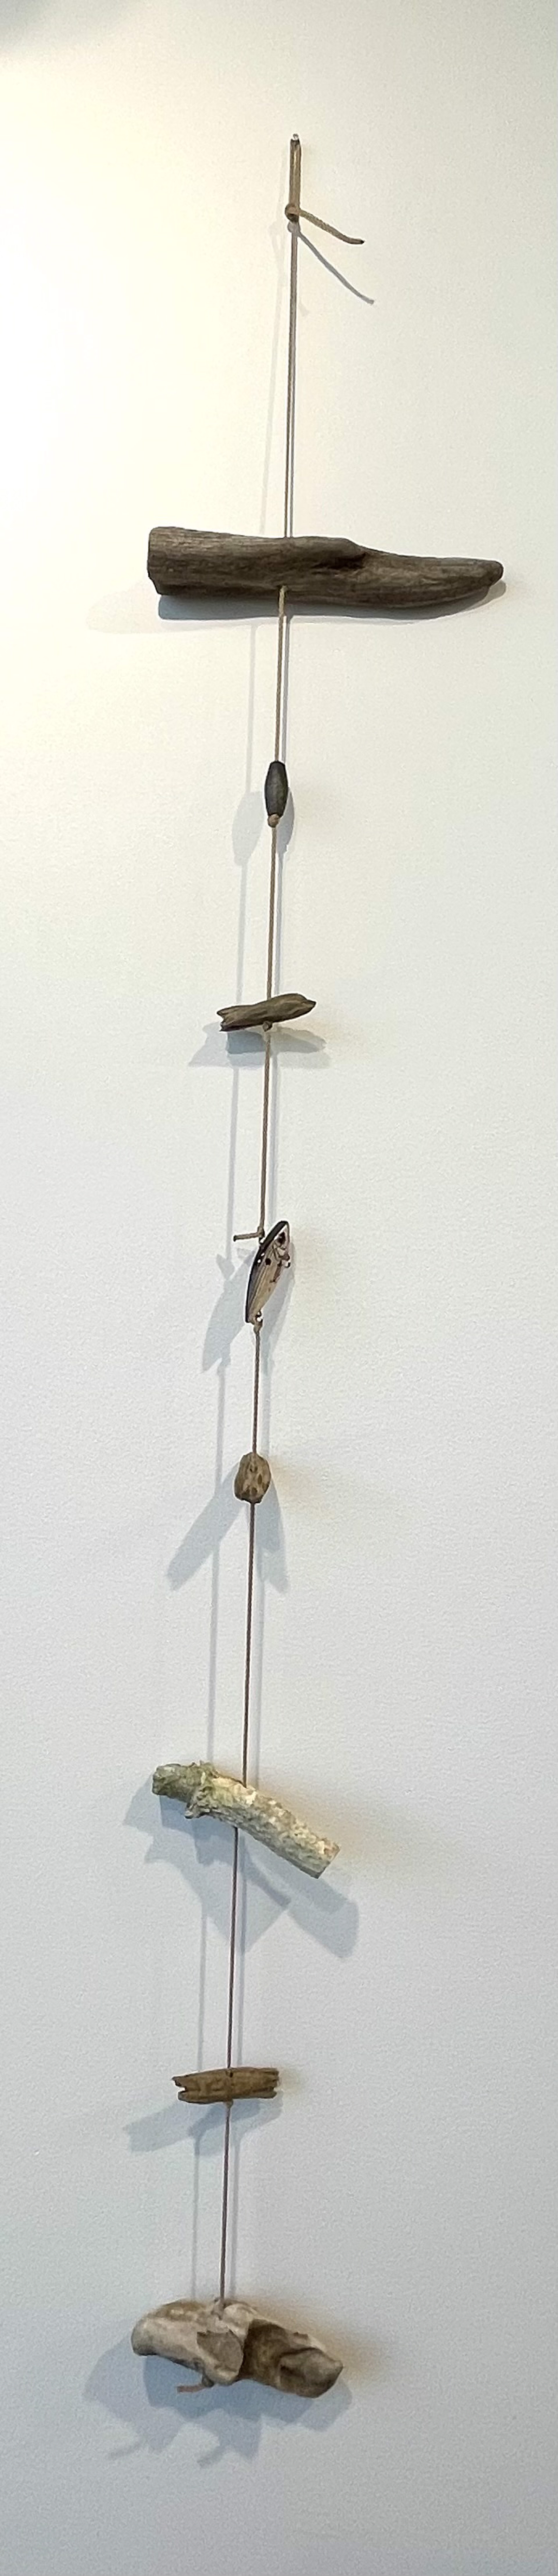 Driftwood Chime Horns and Red-Eyed Swimmer by Jason Davis